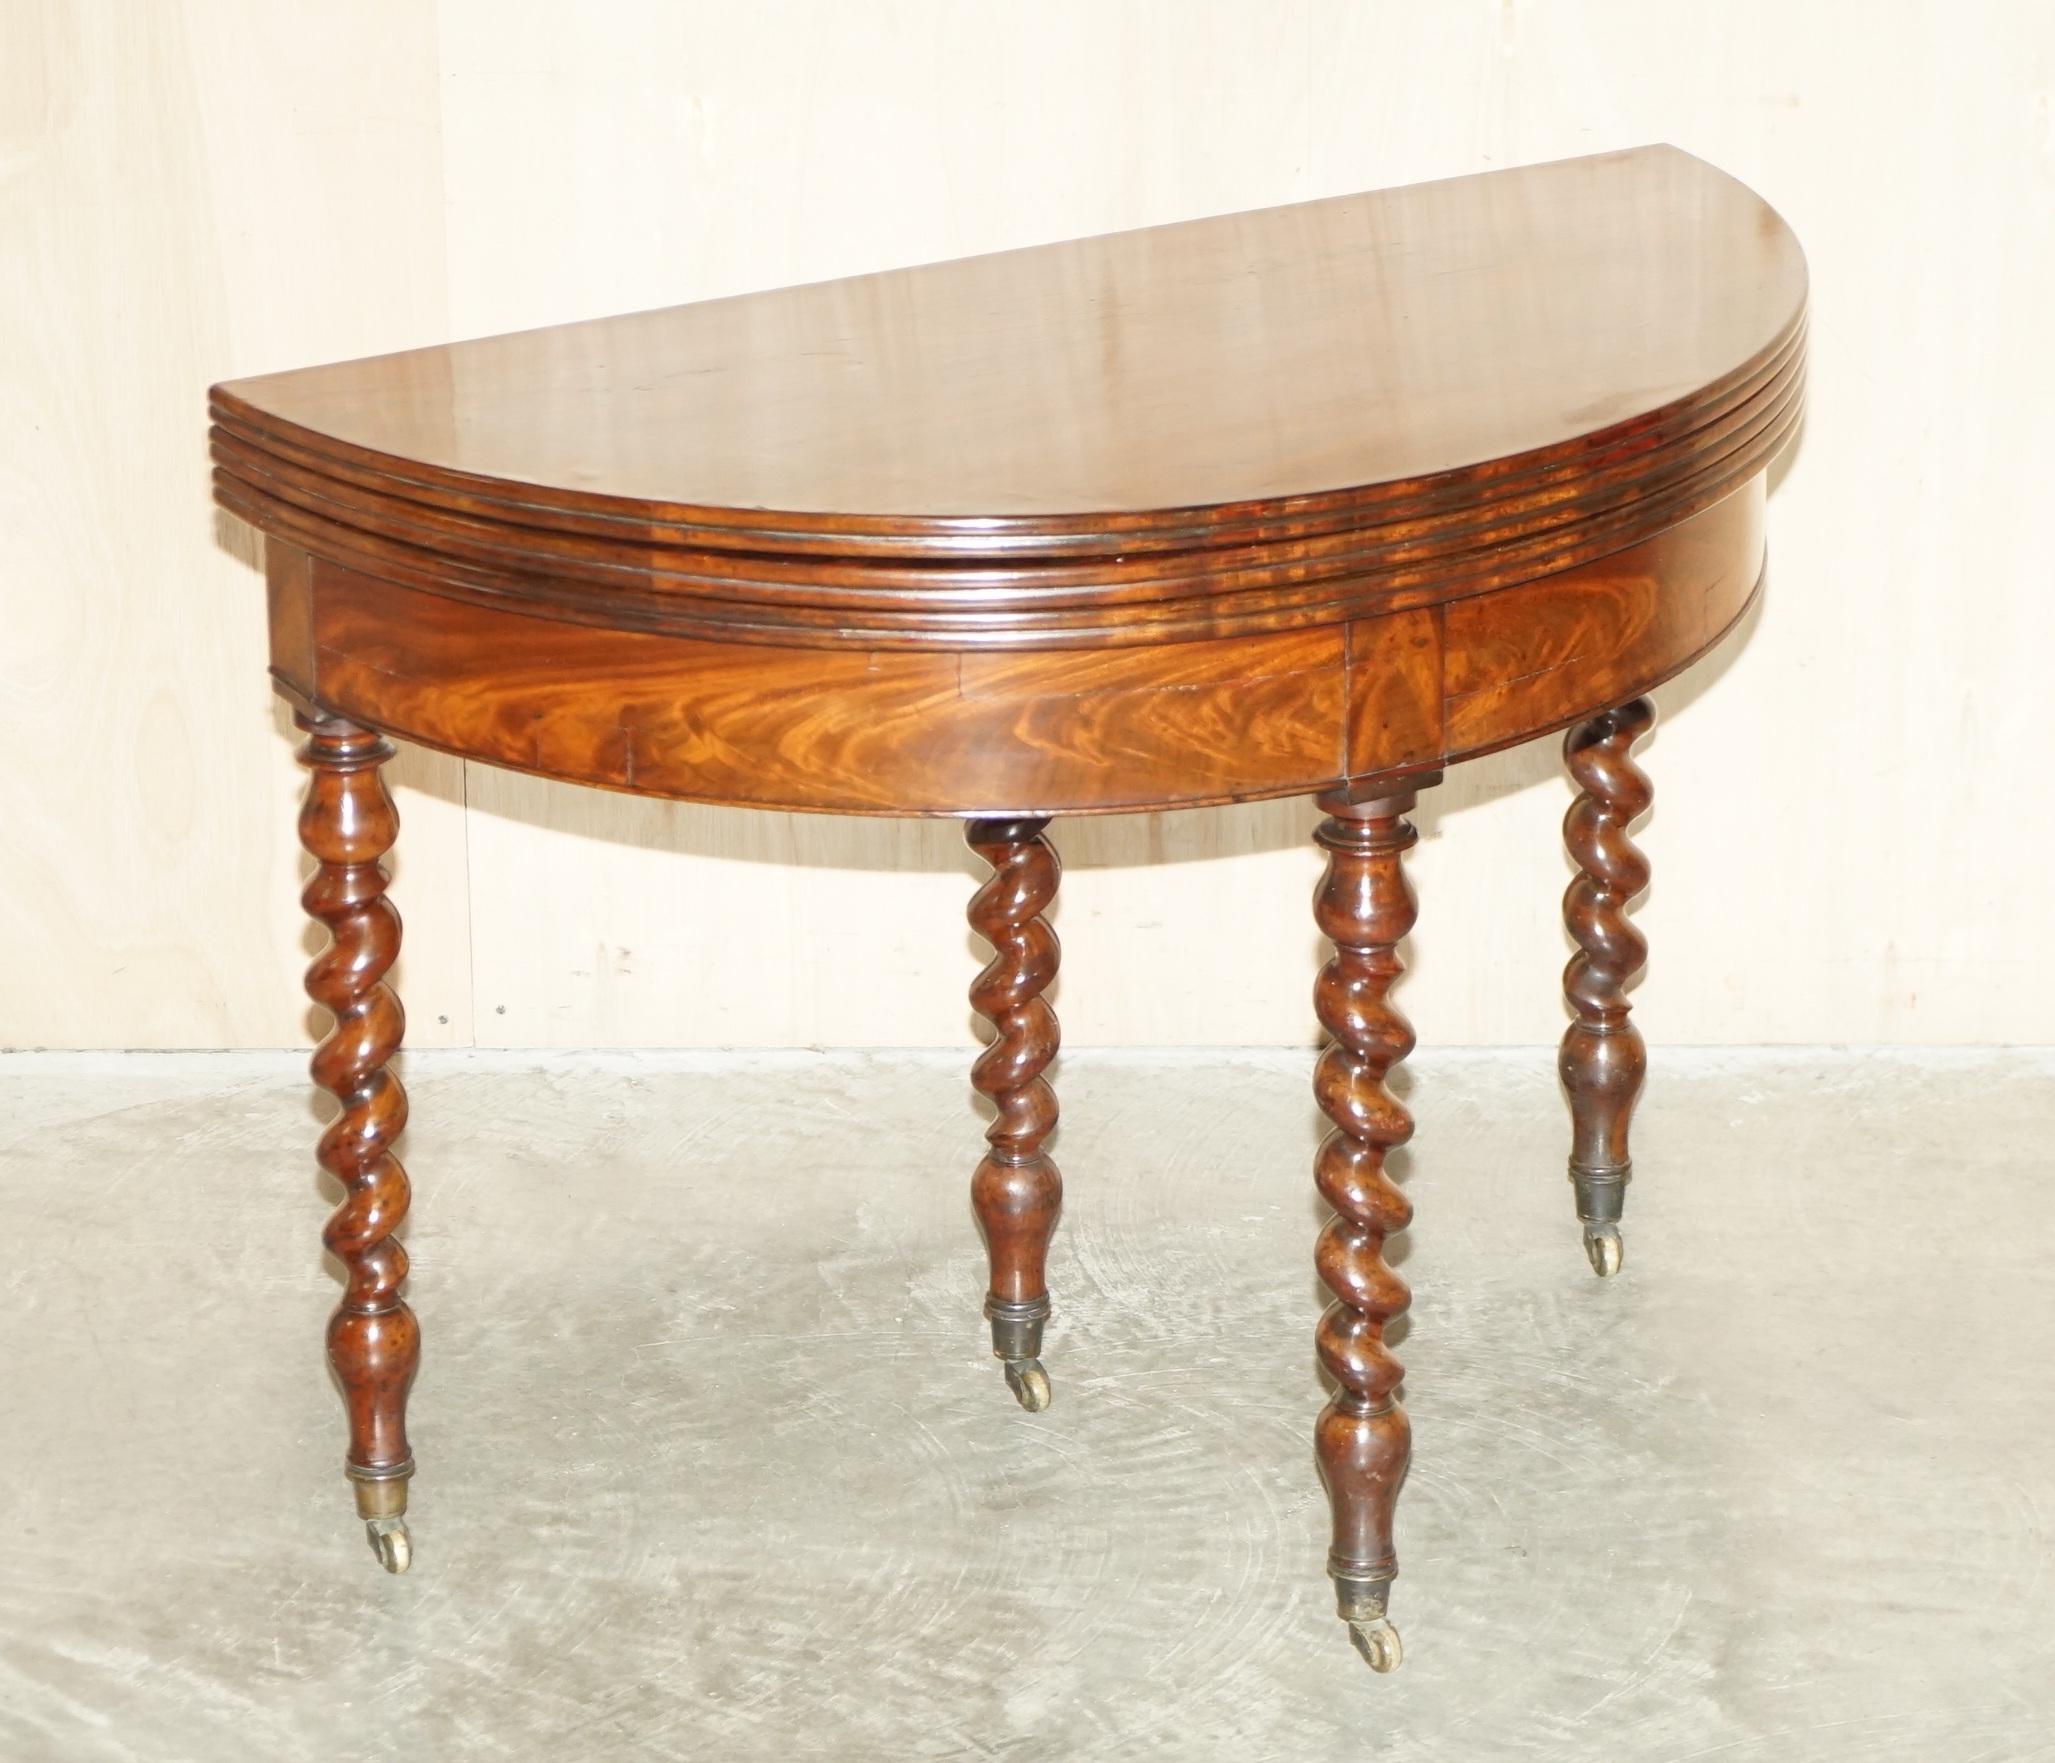 Royal House Antiques

Royal House Antiques is delighted to offer for sale this absolutely exquisite fully restored circa 1800 French Directorie Demi Lune Extending games card table

Please note the delivery fee listed is just a guide, it covers